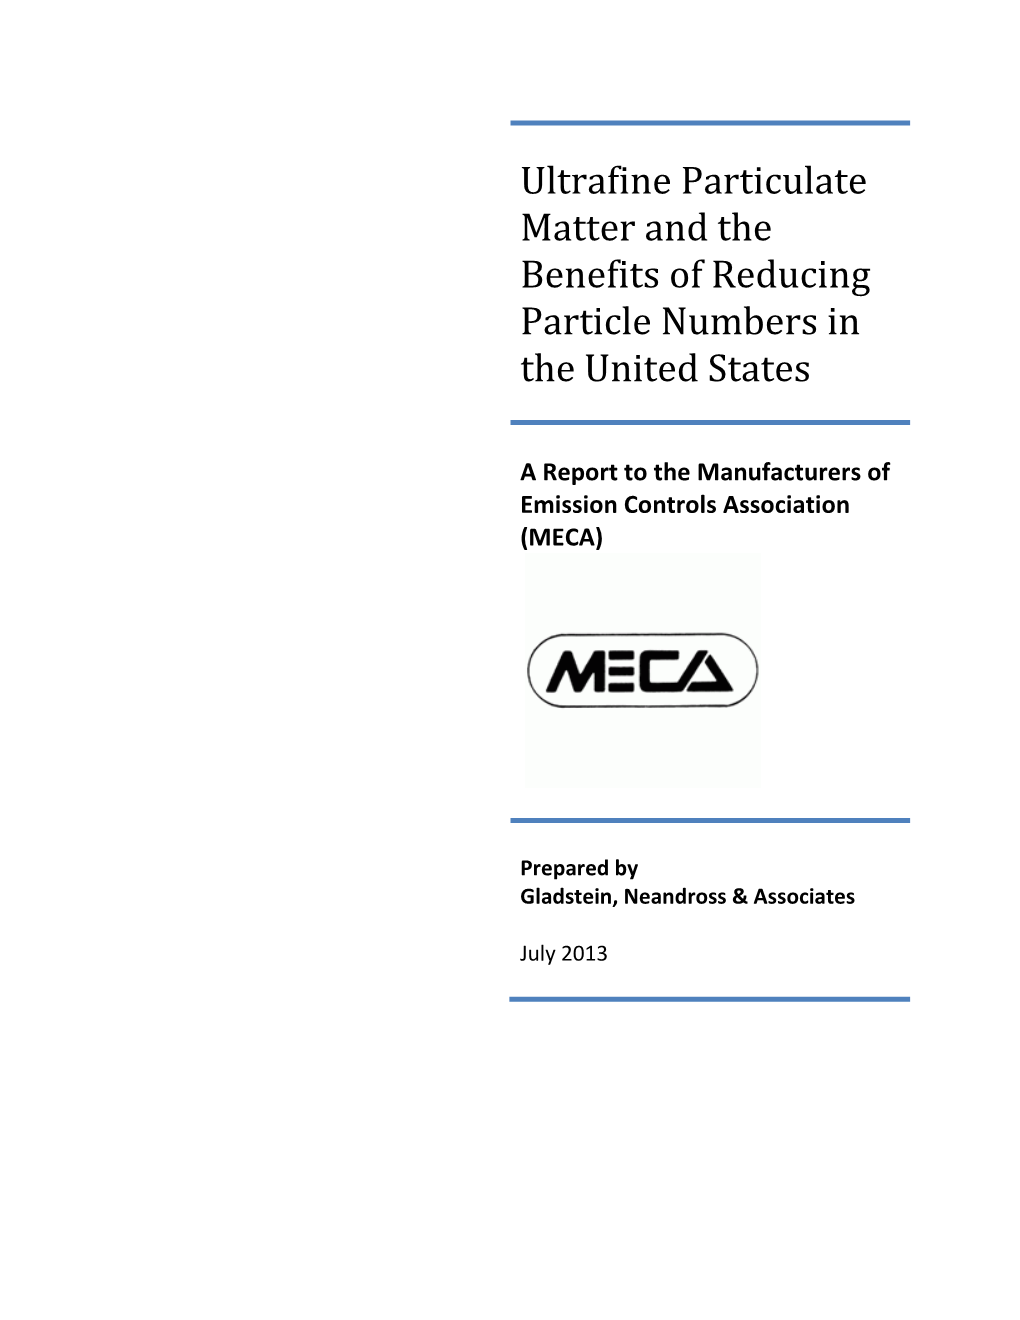 Ultrafine Particulate Matter and the Benefits of Reducing Particle Numbers in the United States